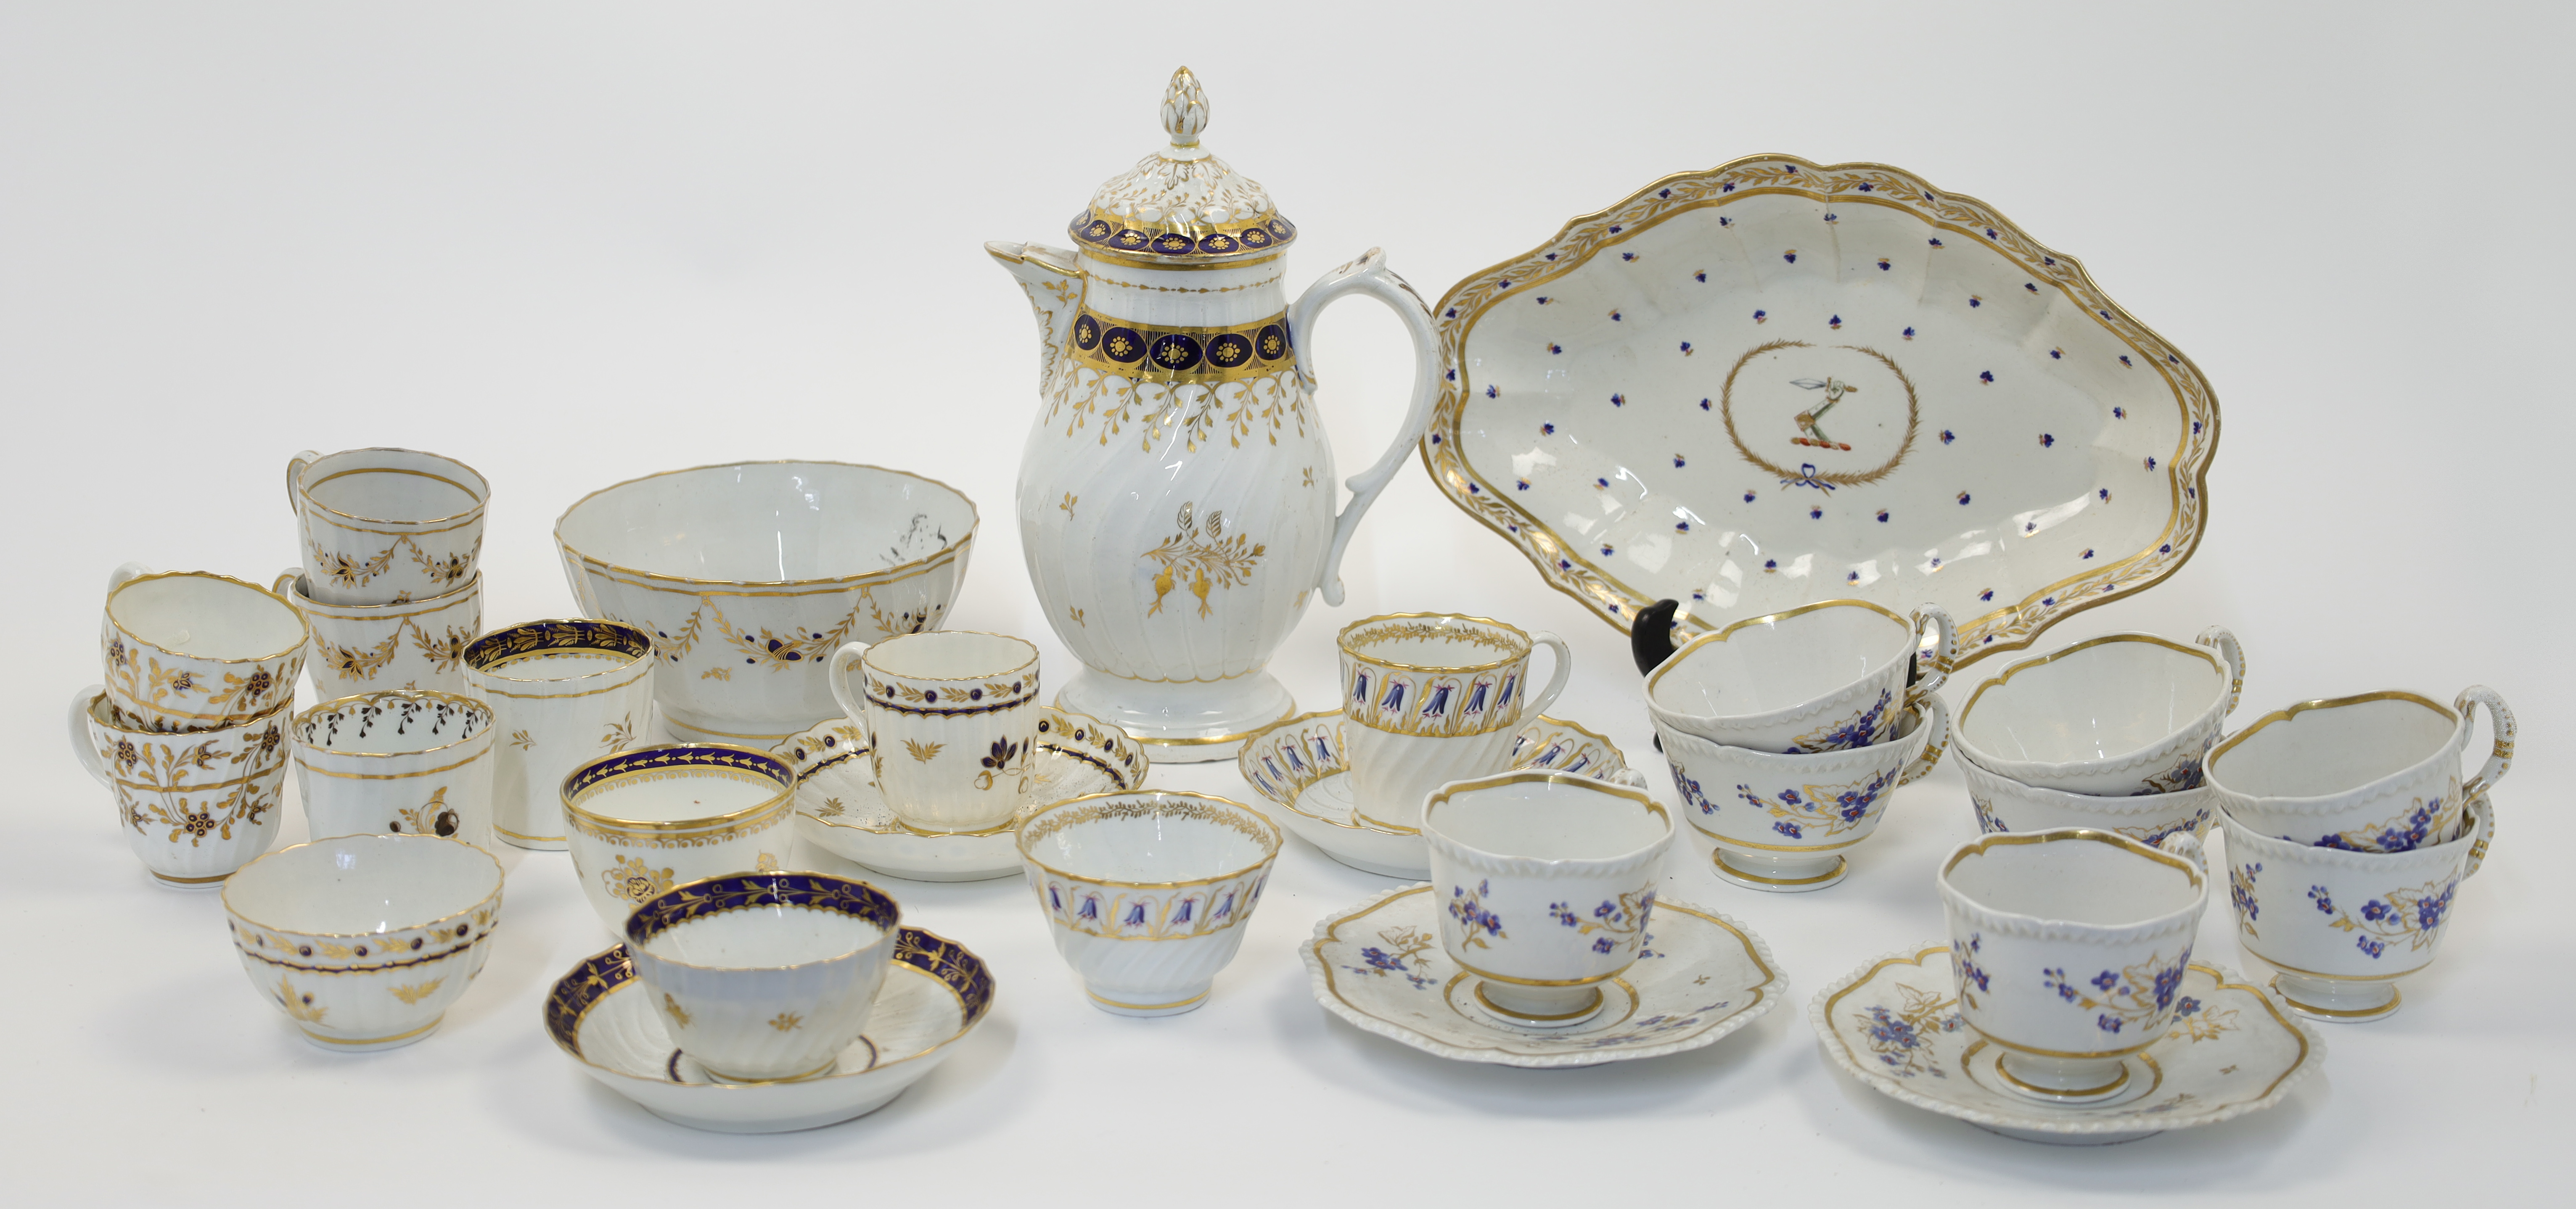 A collection of Worcester blue and gilt porcelain, 18th - 19th centuries, comprising: a Chamberla...